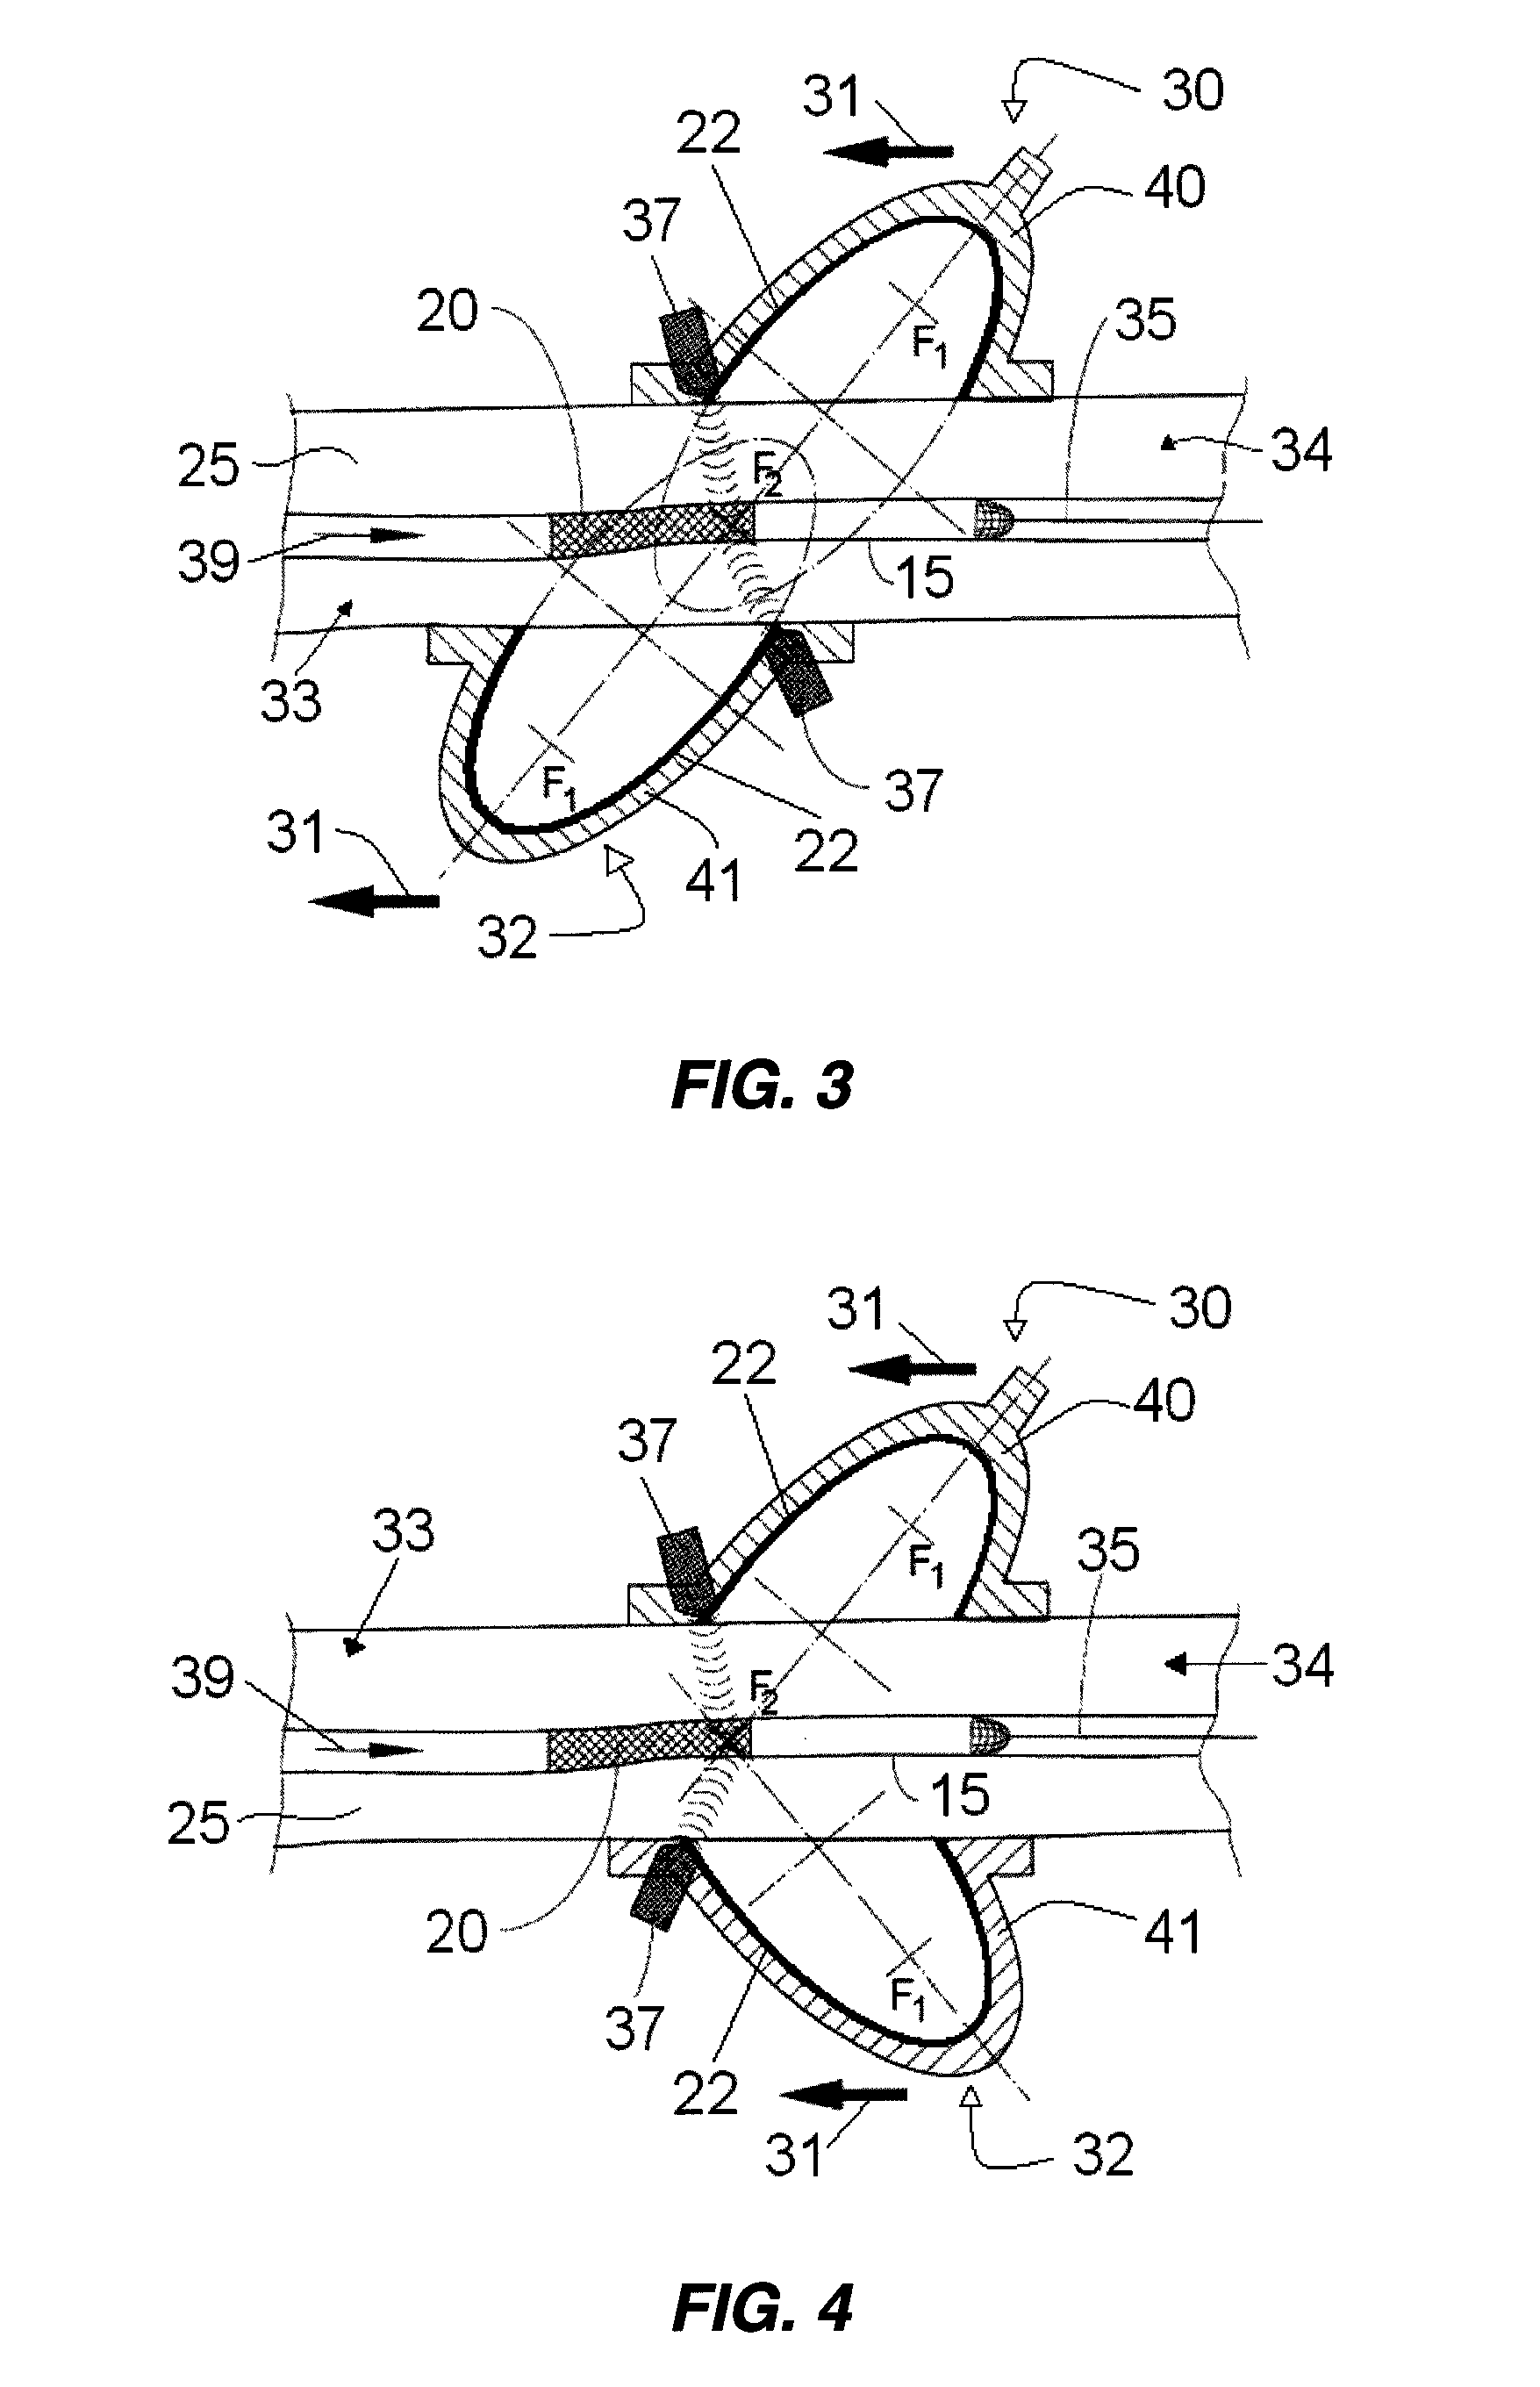 Extracorporeal pressure shock wave device